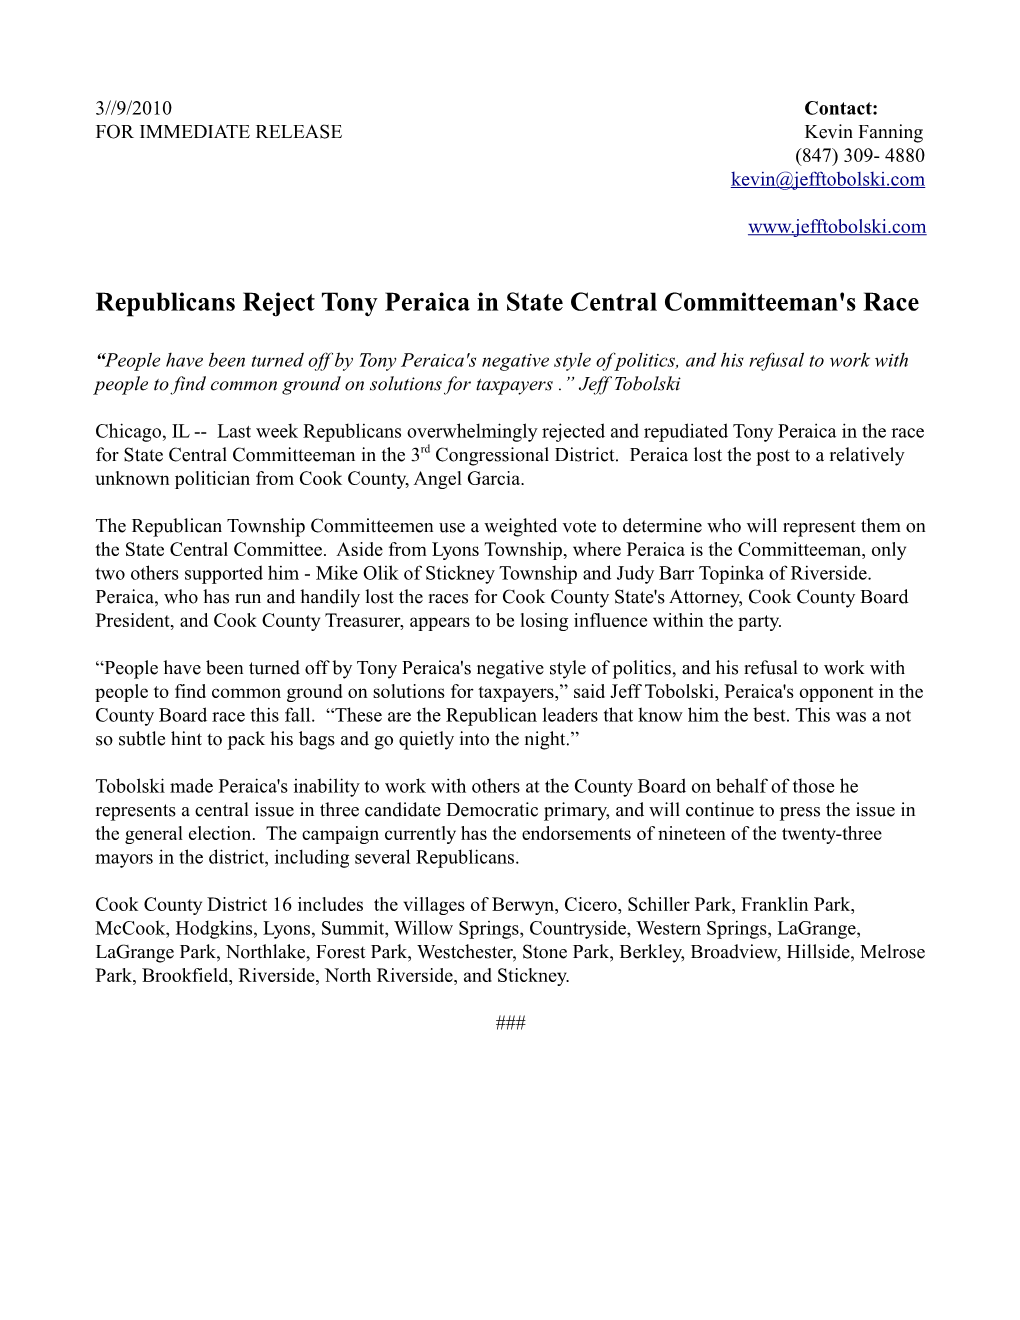 Republicans Reject Tony Peraica in State Central Committeeman's Race